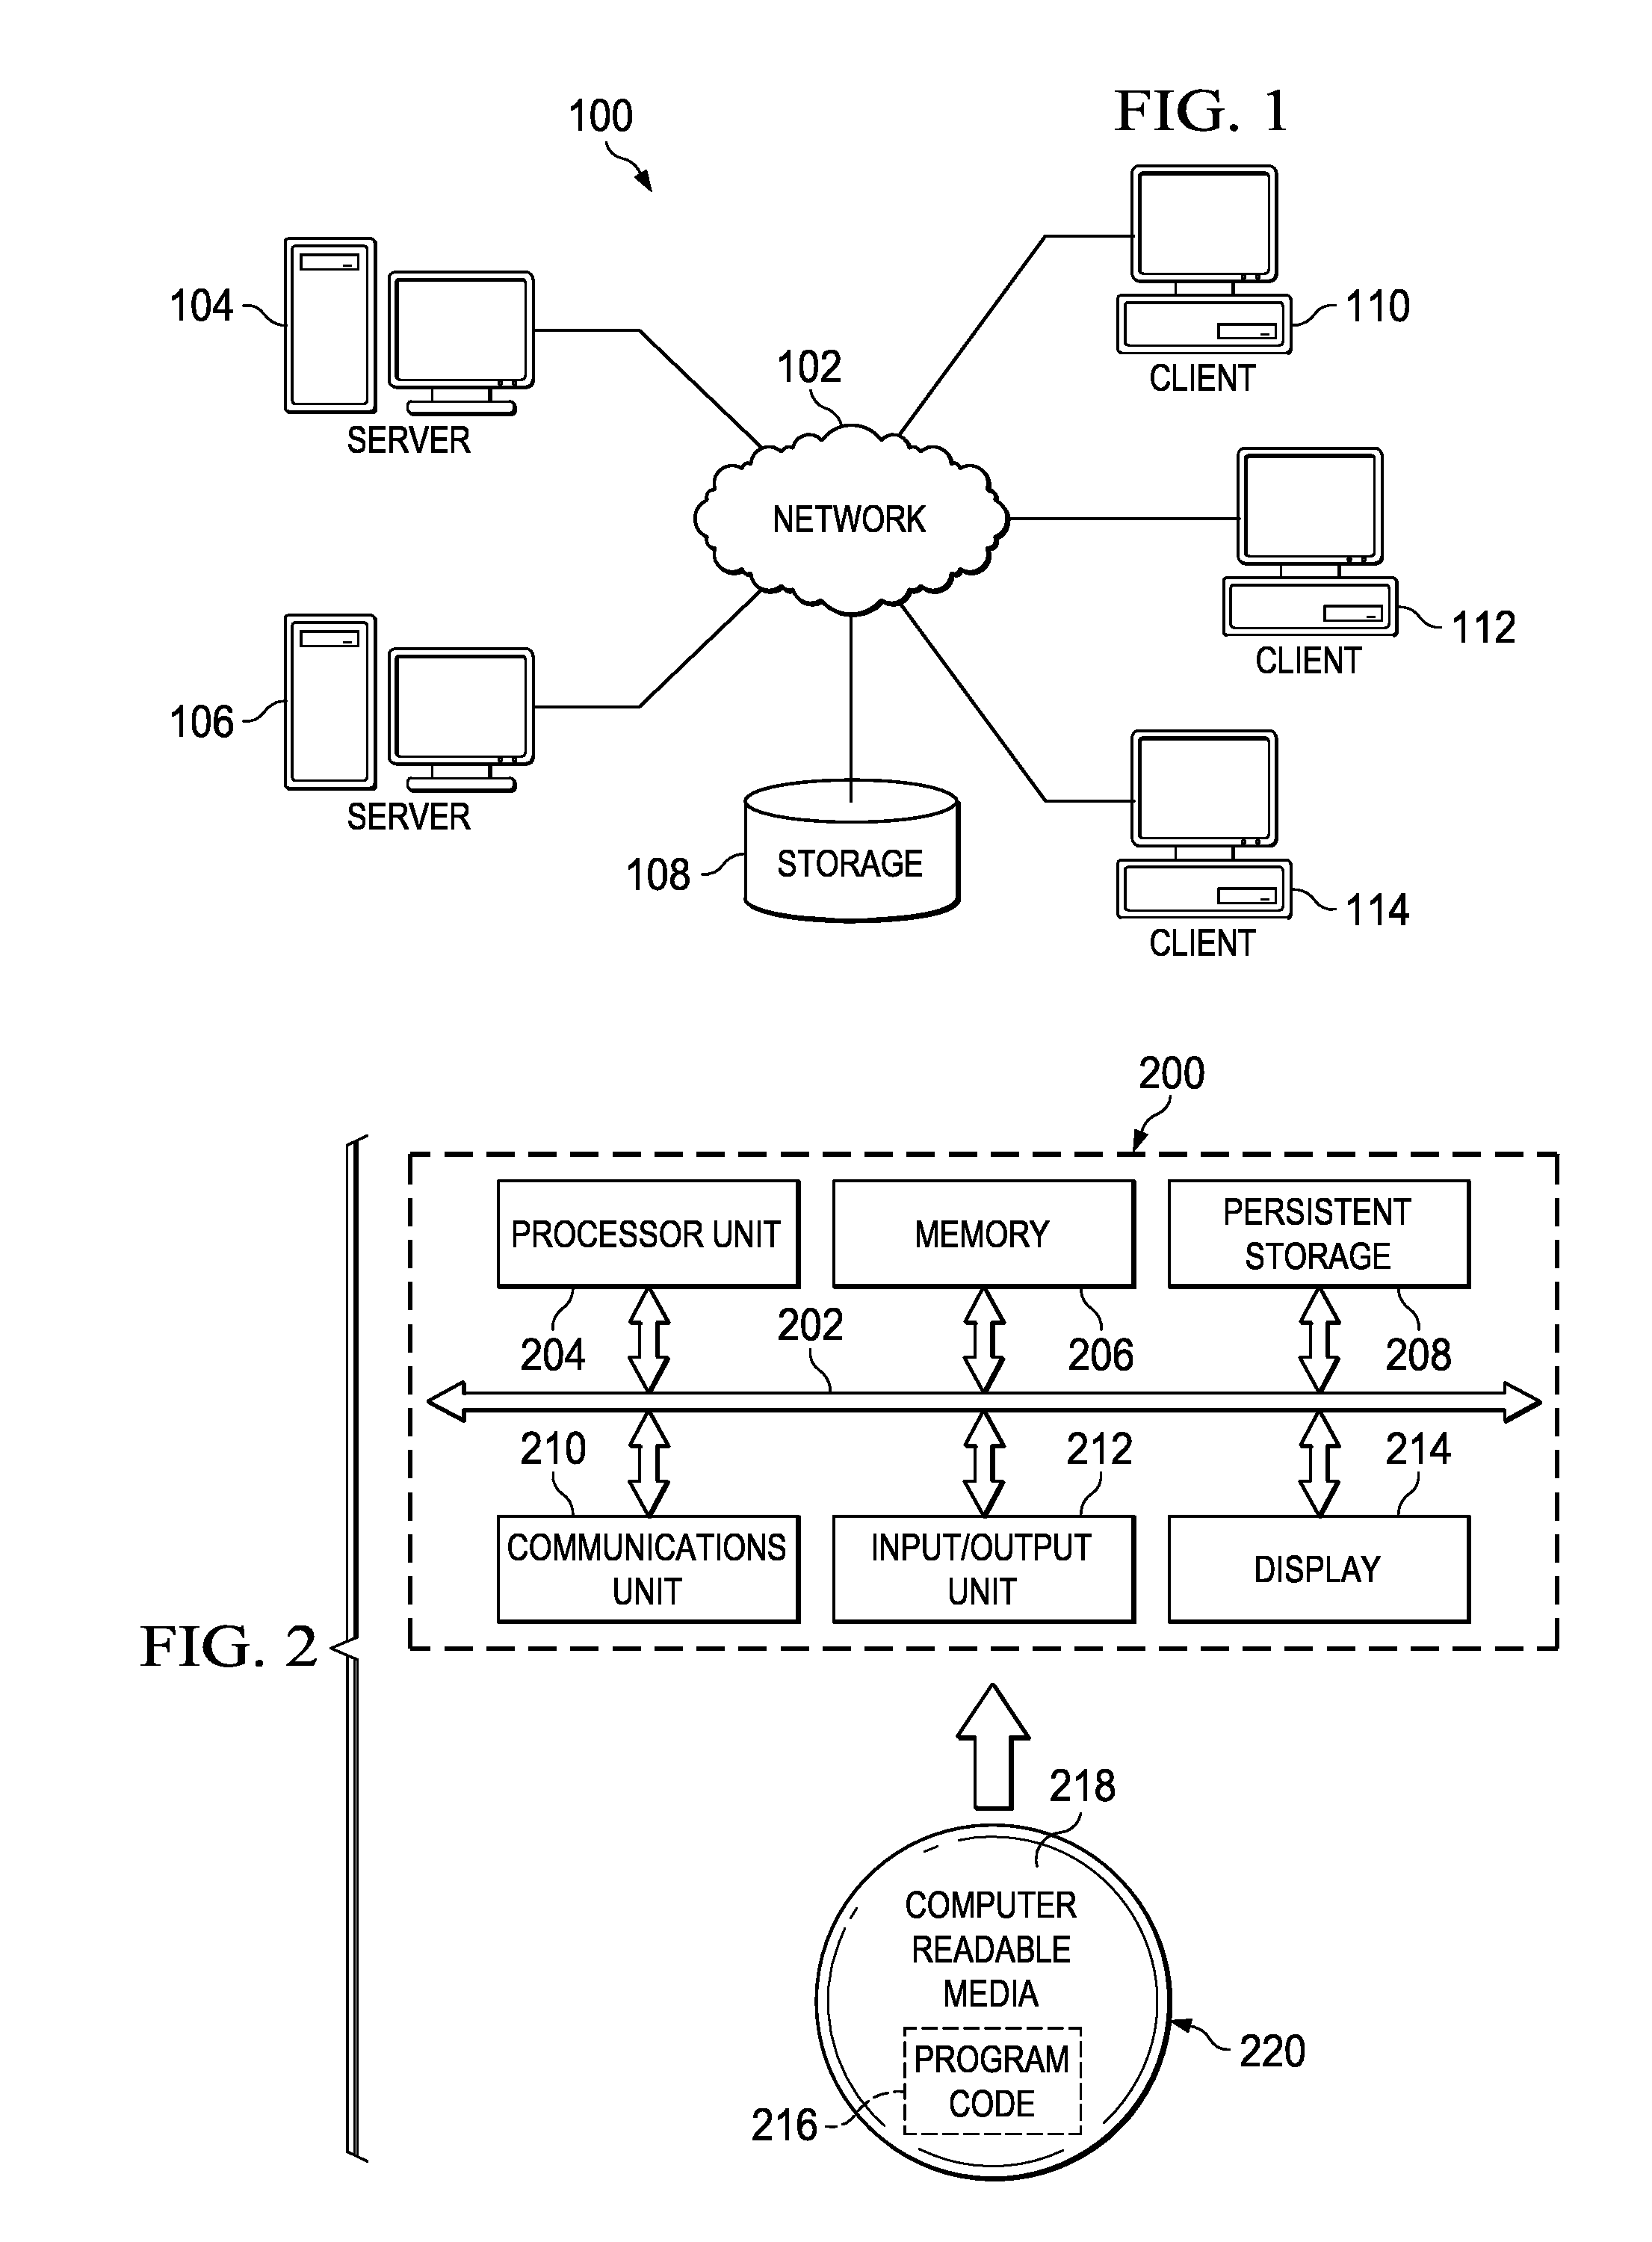 Method and apparatus for bridging real-world web applications and 3D virtual worlds